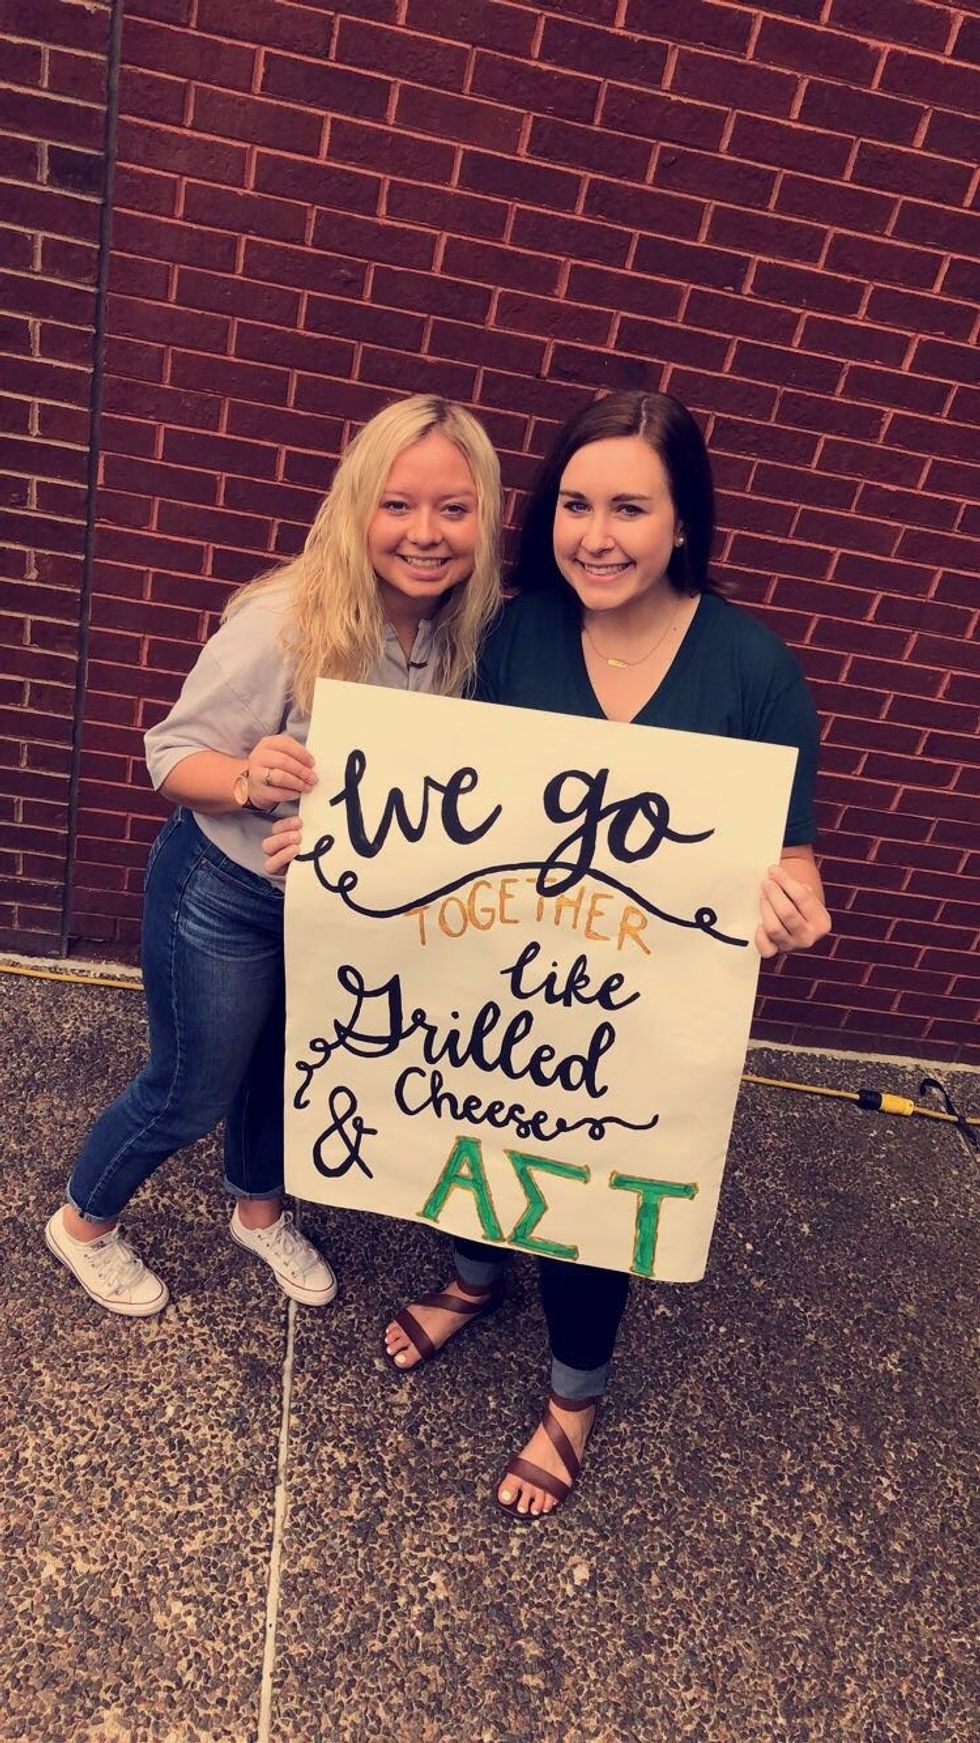 It Has Been A Month Since I Joined Alpha Sigma Tau, And I've Already Found Sisters For Life